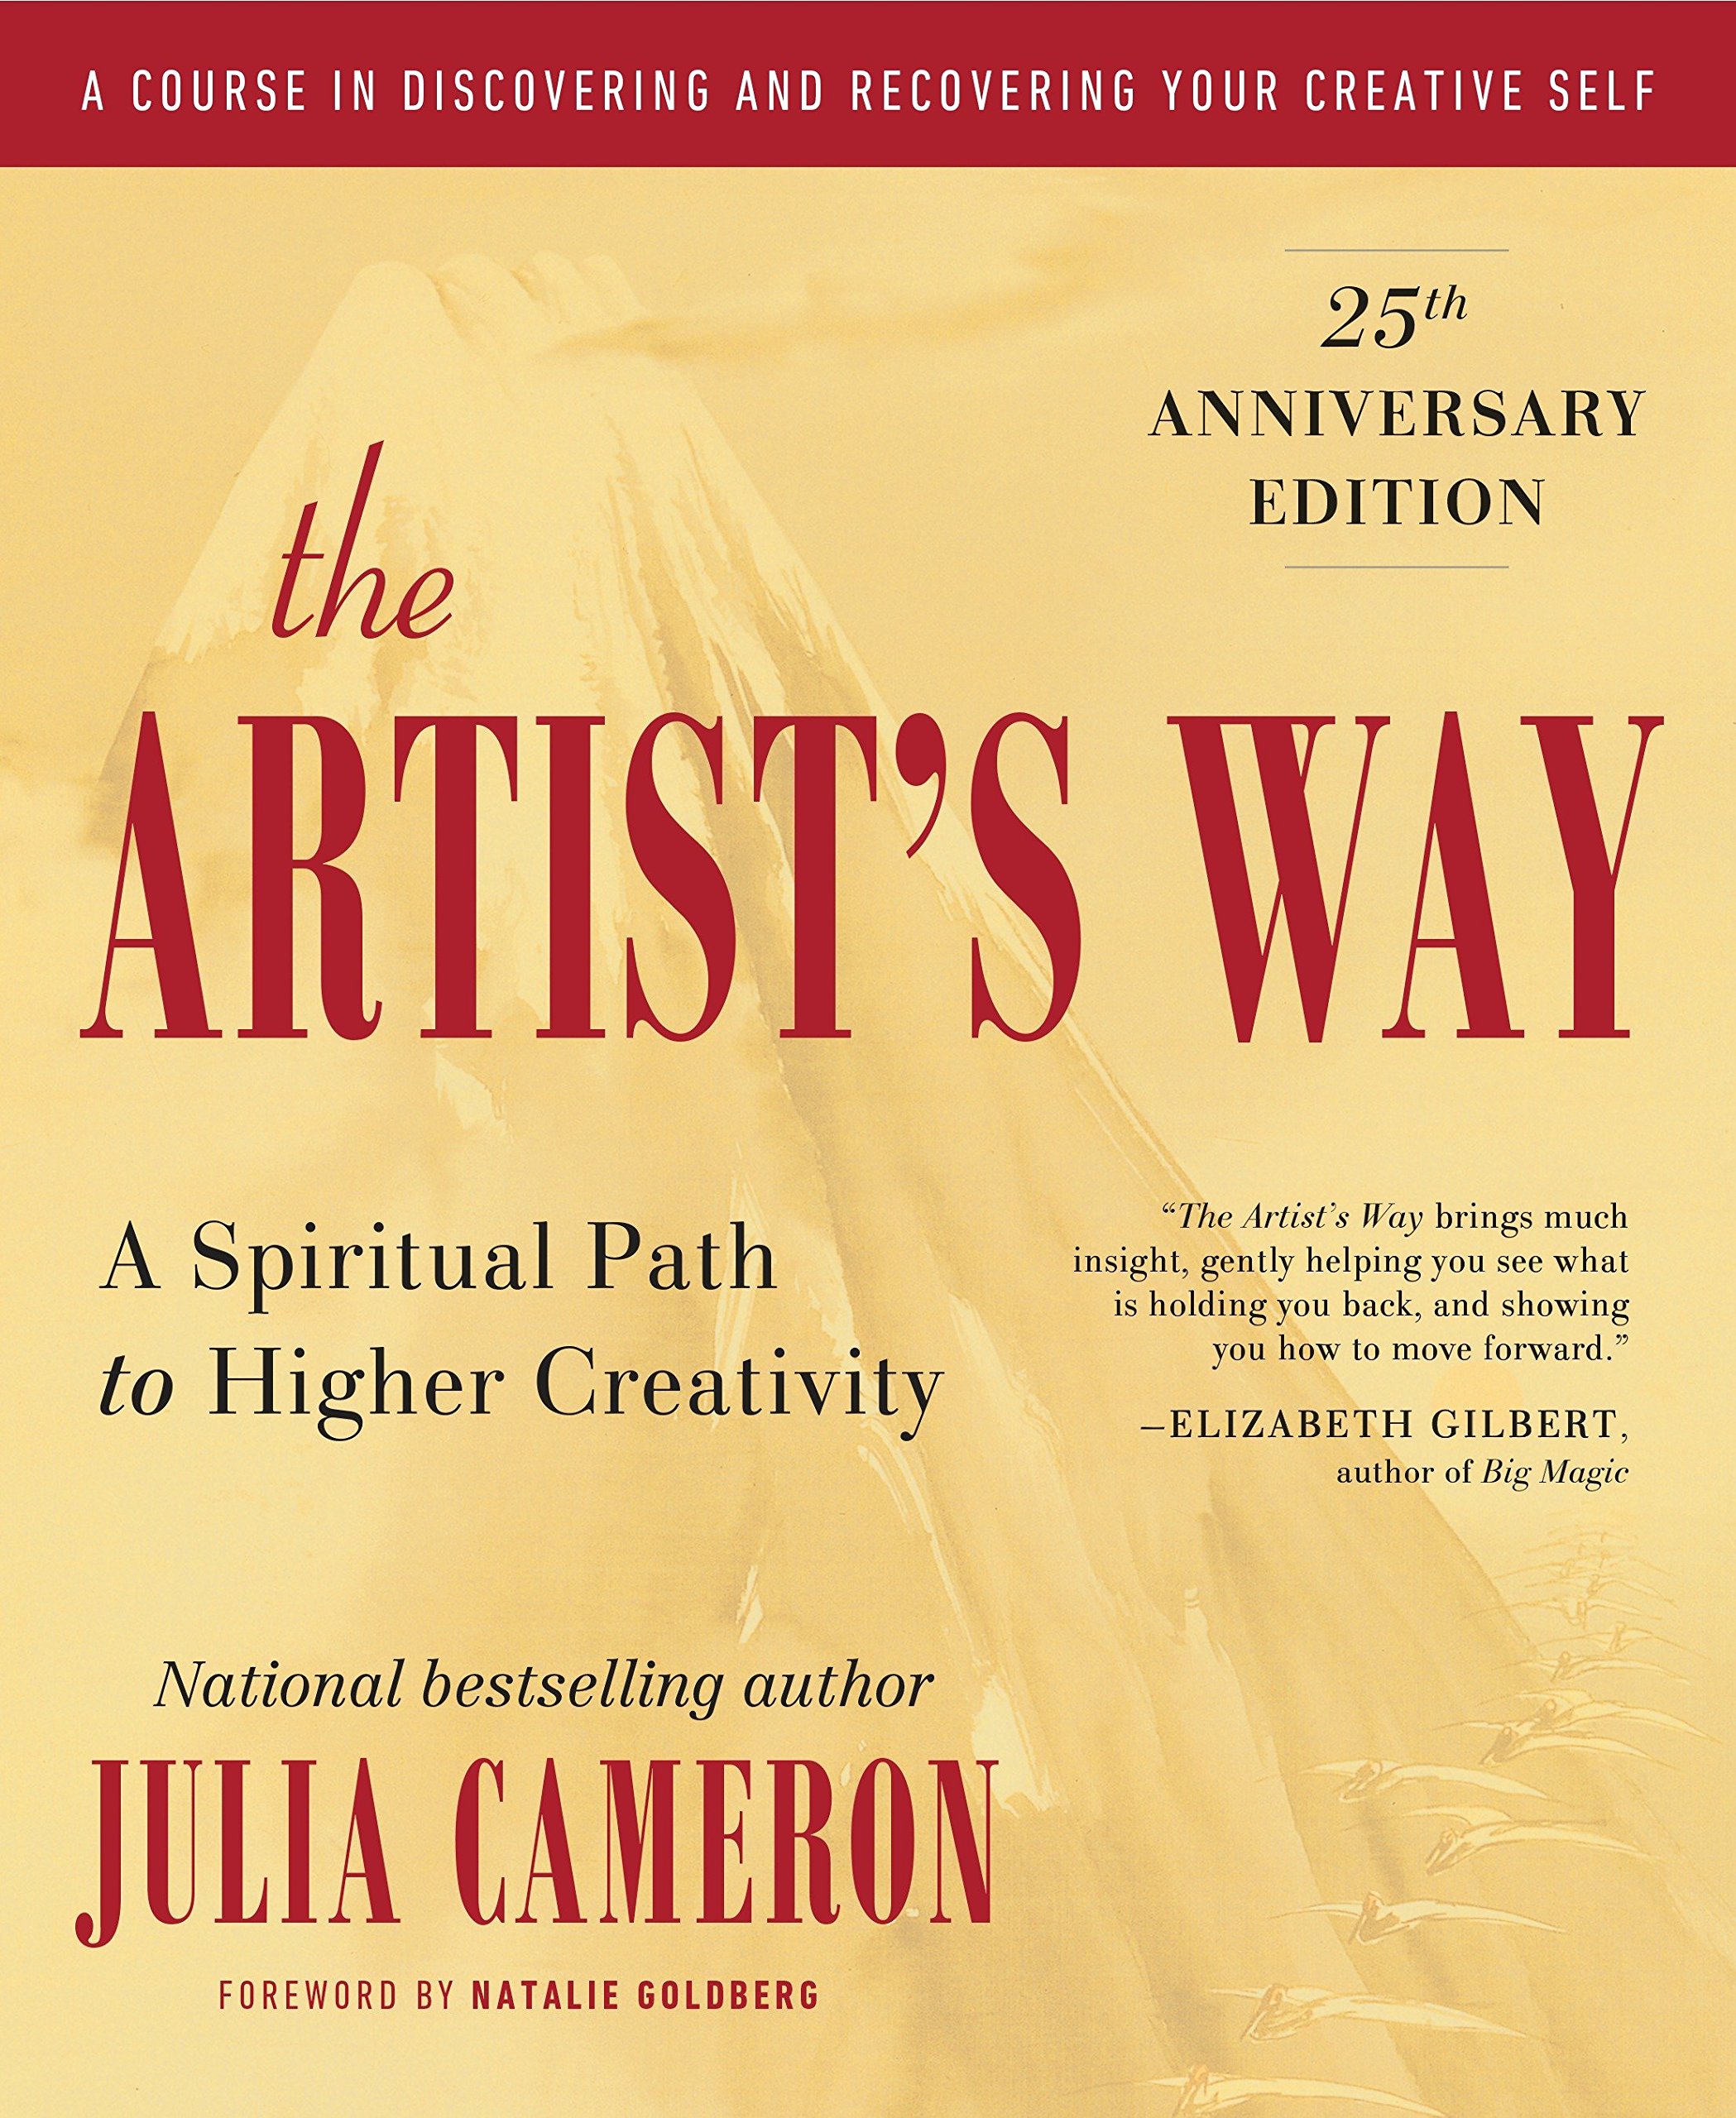 The Artist’s Way by Julia Cameron